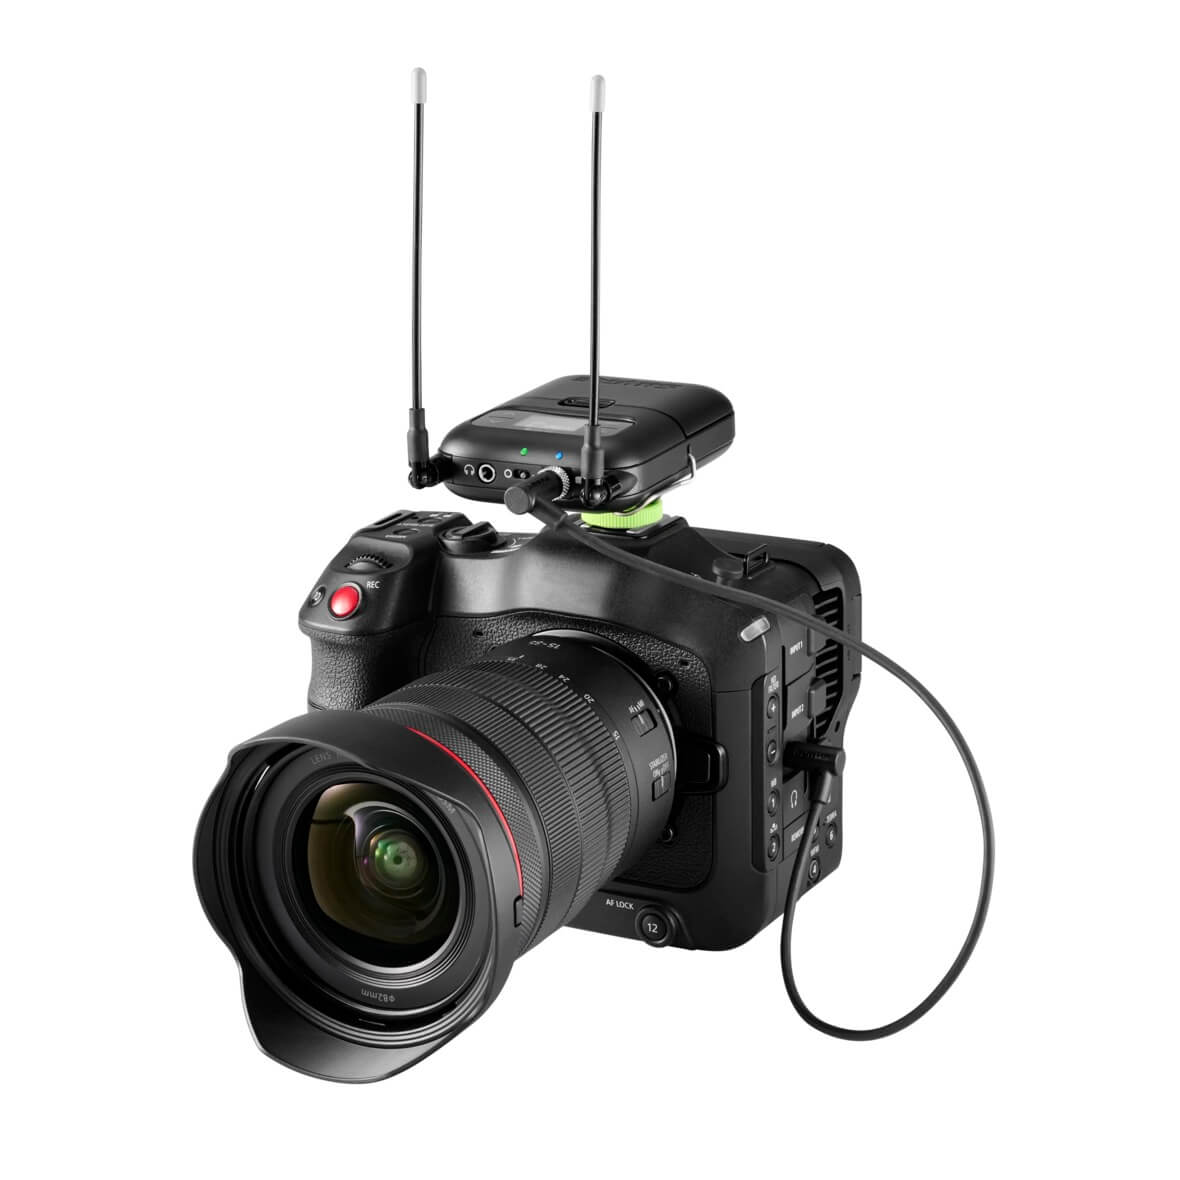 Shure SLXD5 single-channel portable receiver, shown mounted on a DSLR